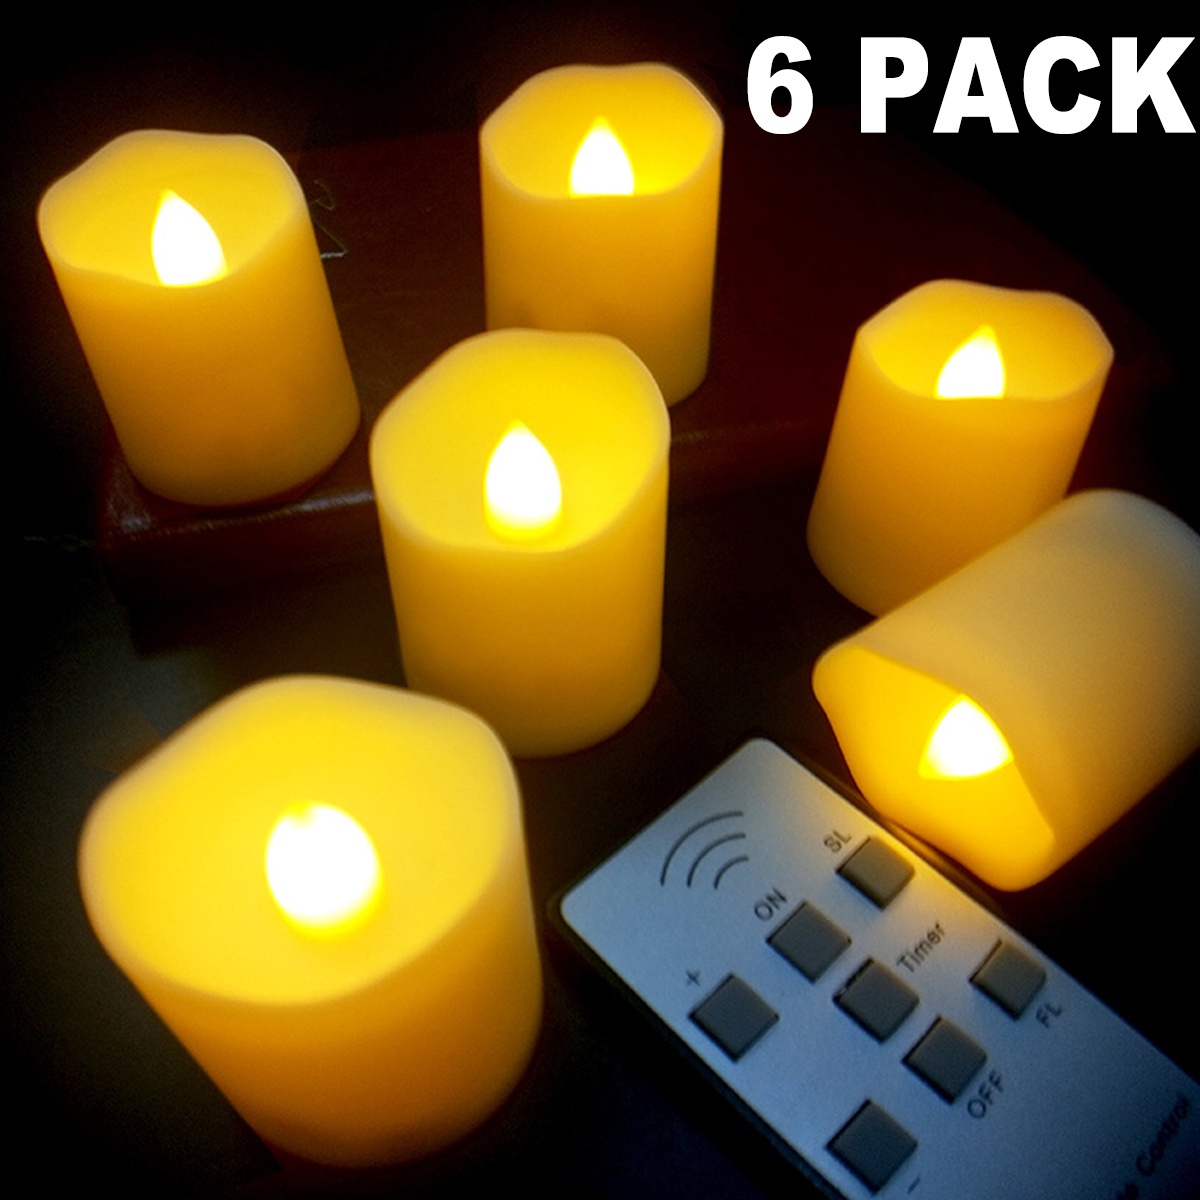 6Pcs LED Flameless Candle Lights Warm Light Pillar Ivory Candles Moving Wick Battery Operated Timer Remote Control Night Light